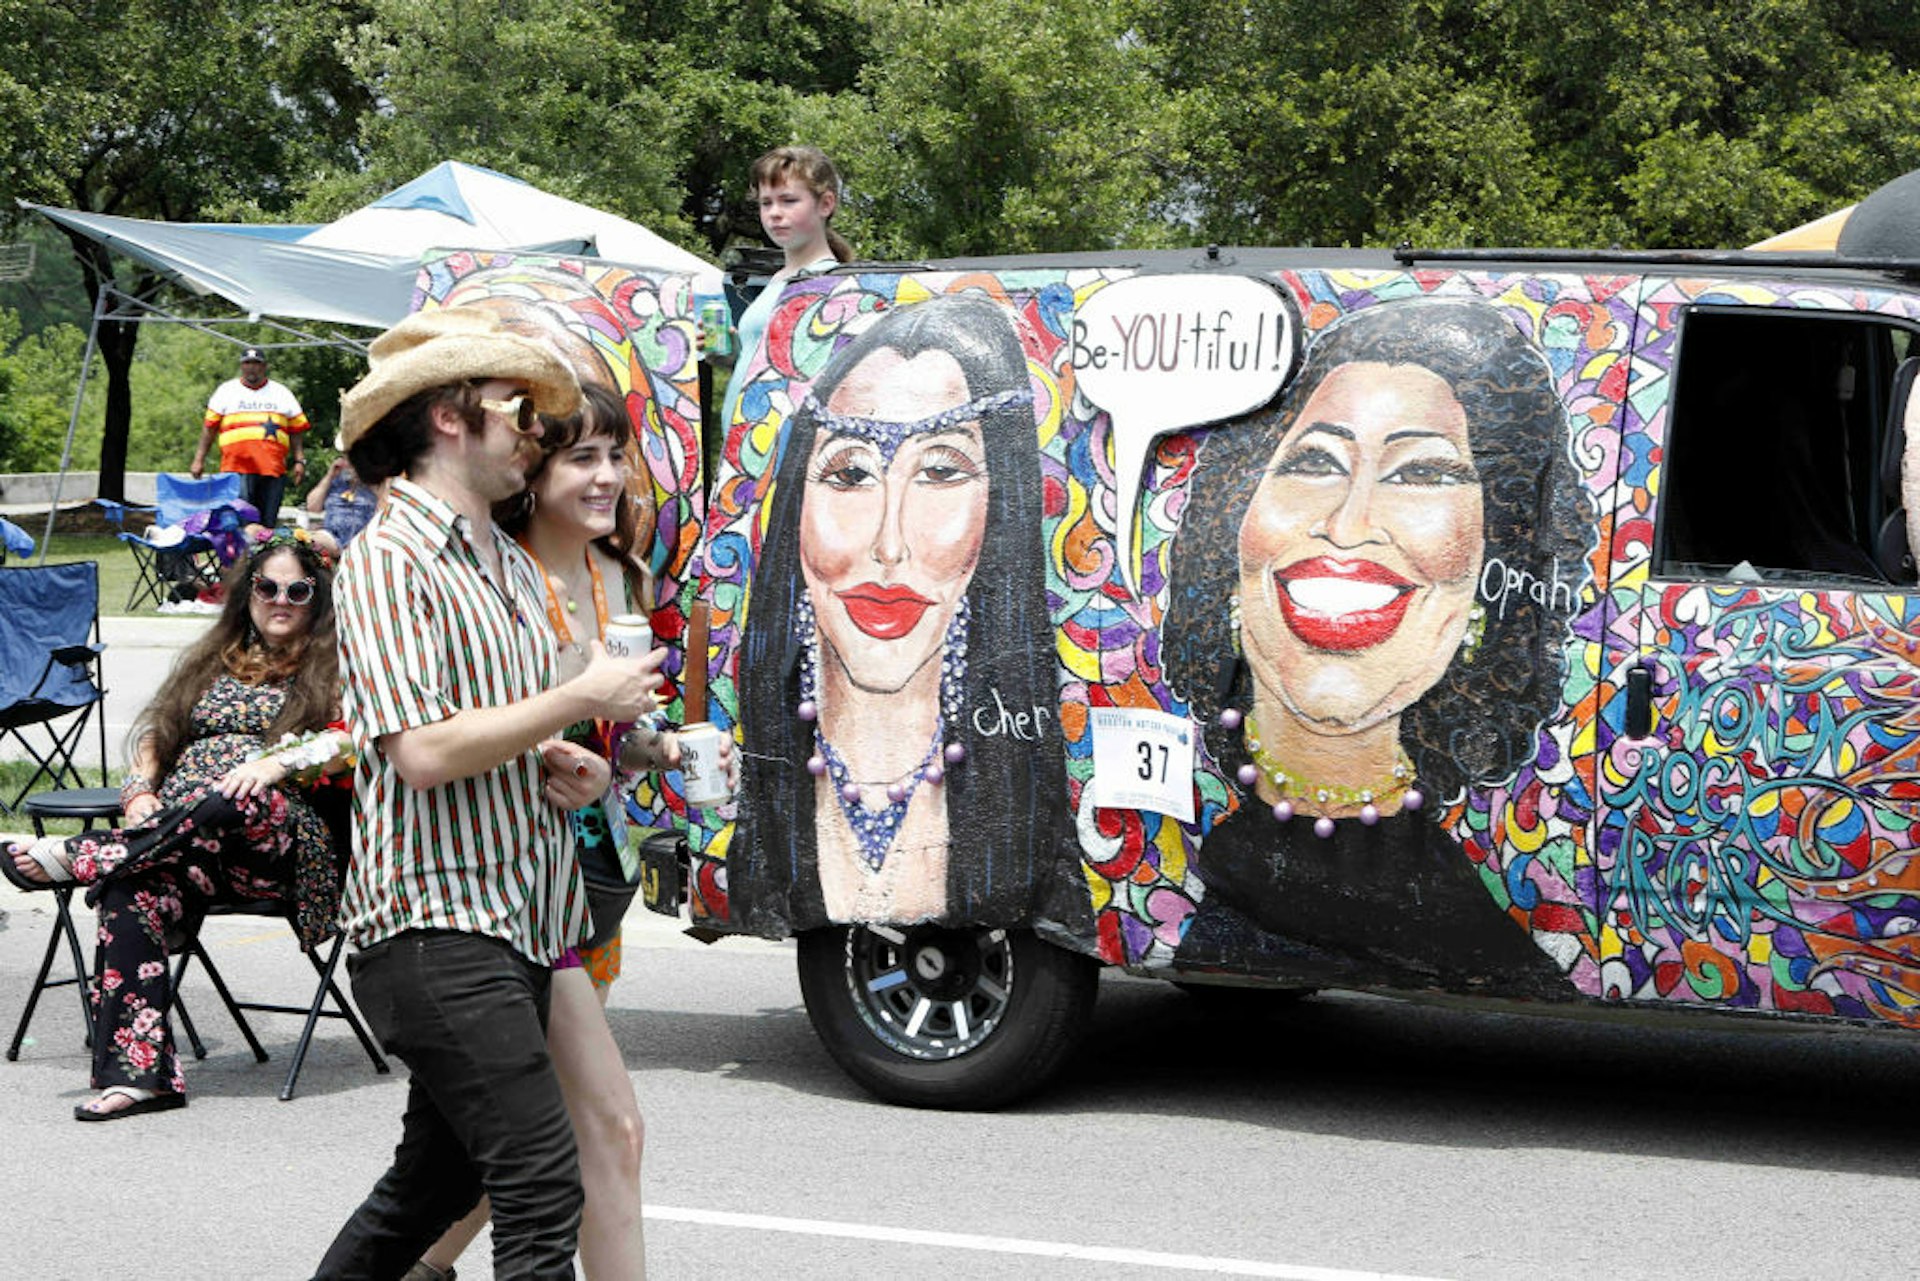  People pass by the mobile masterpiece in Houston, Texas, the United States on April 13, 2019. The 32nd Annual Houston Art Car Parade is the world's oldest and largest Art Car Parade.